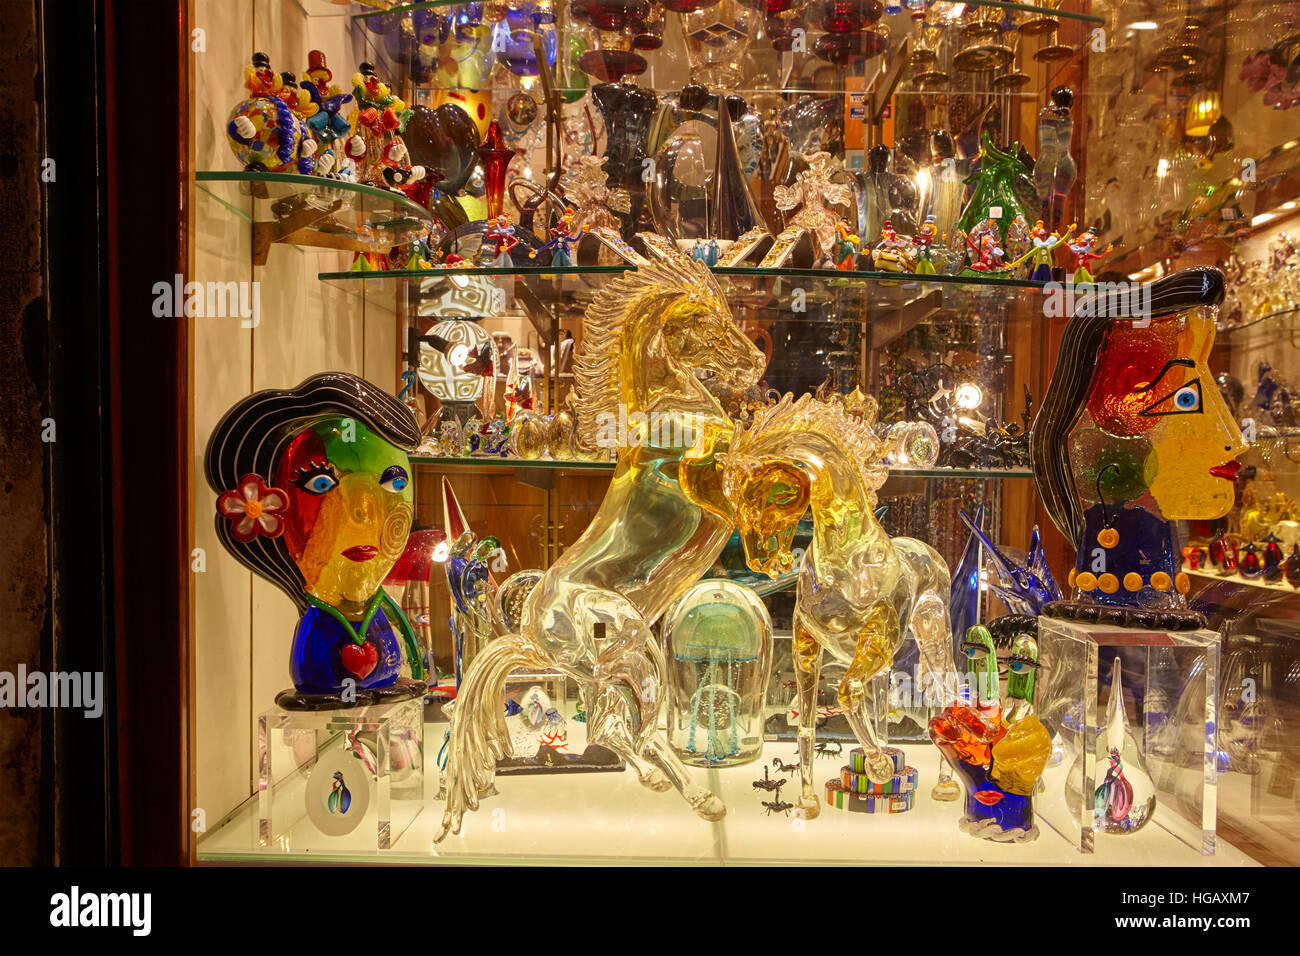 Shop selling traditional Murano glass, Venice, Italy Stock Photo